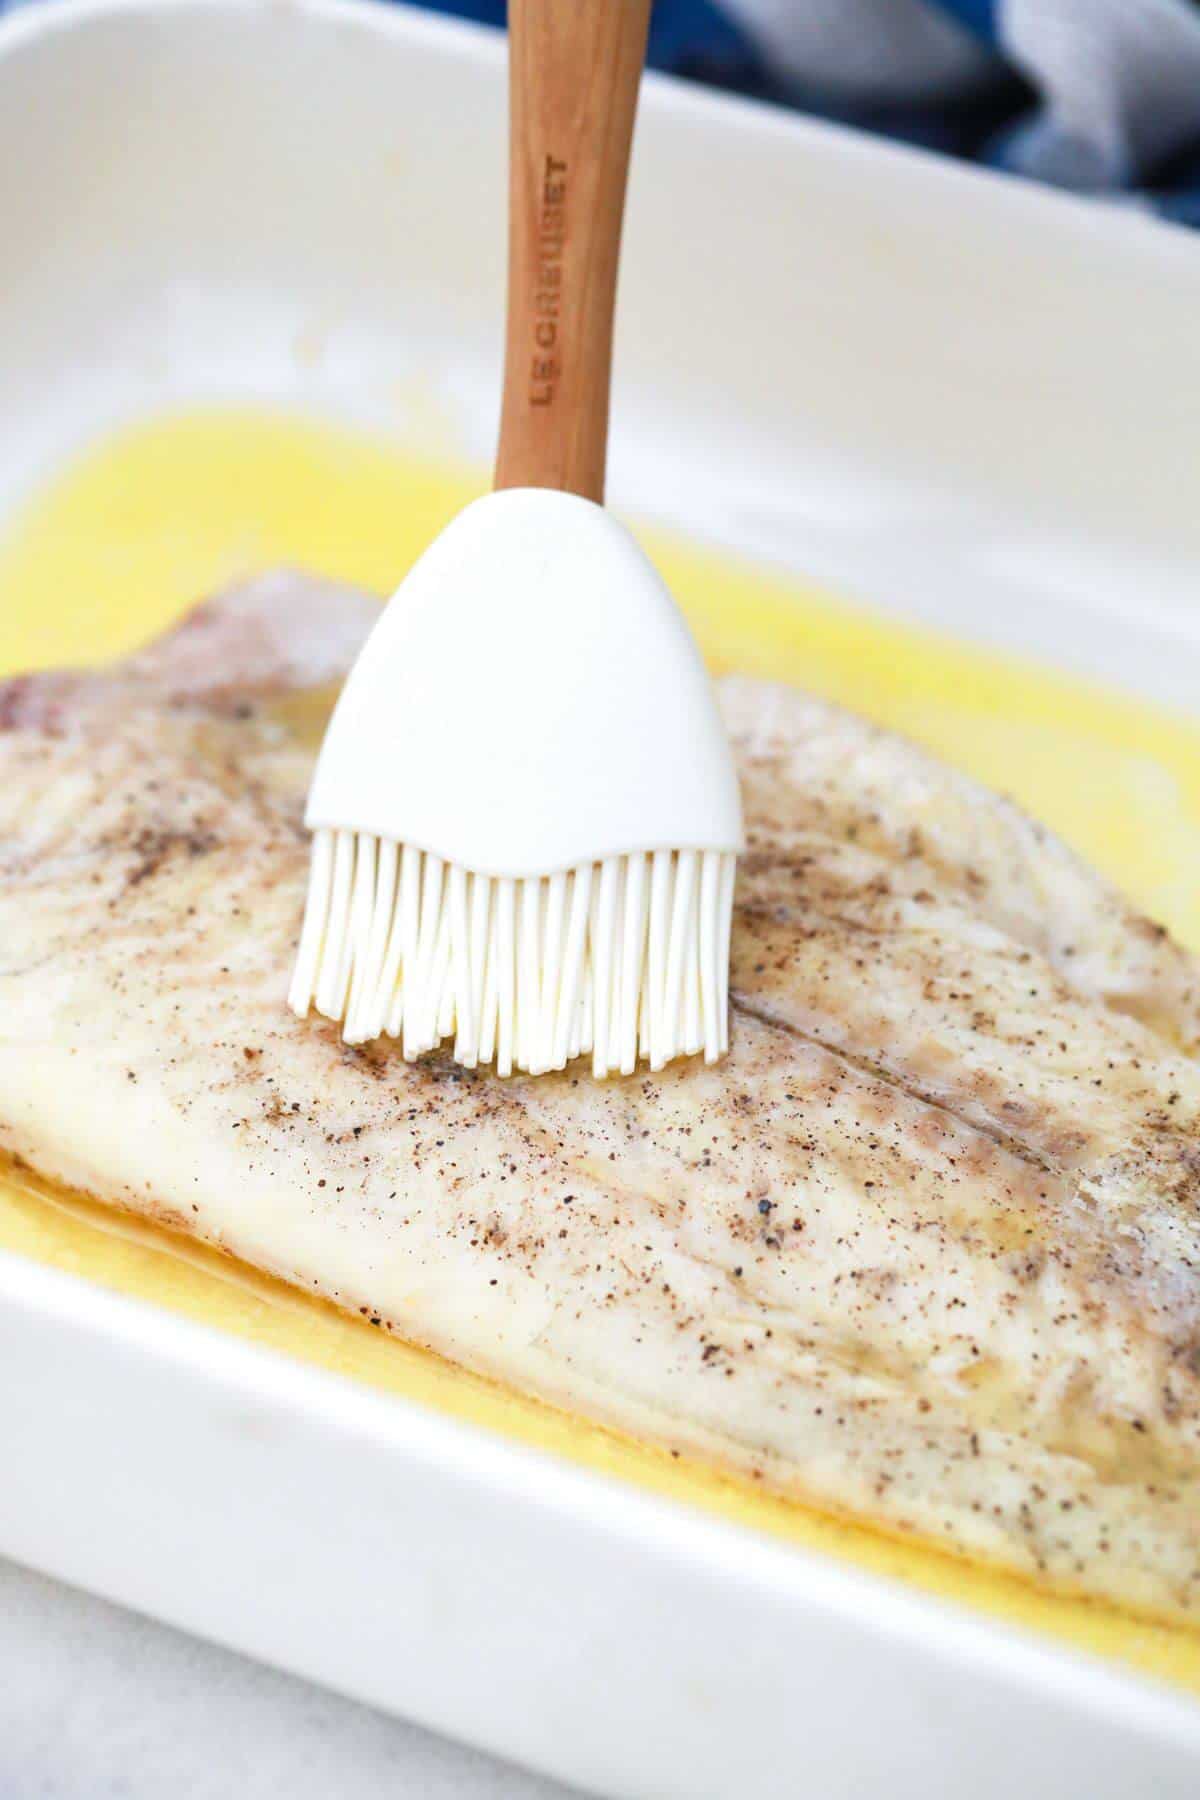 brushing seasoned fish fillet with butter.